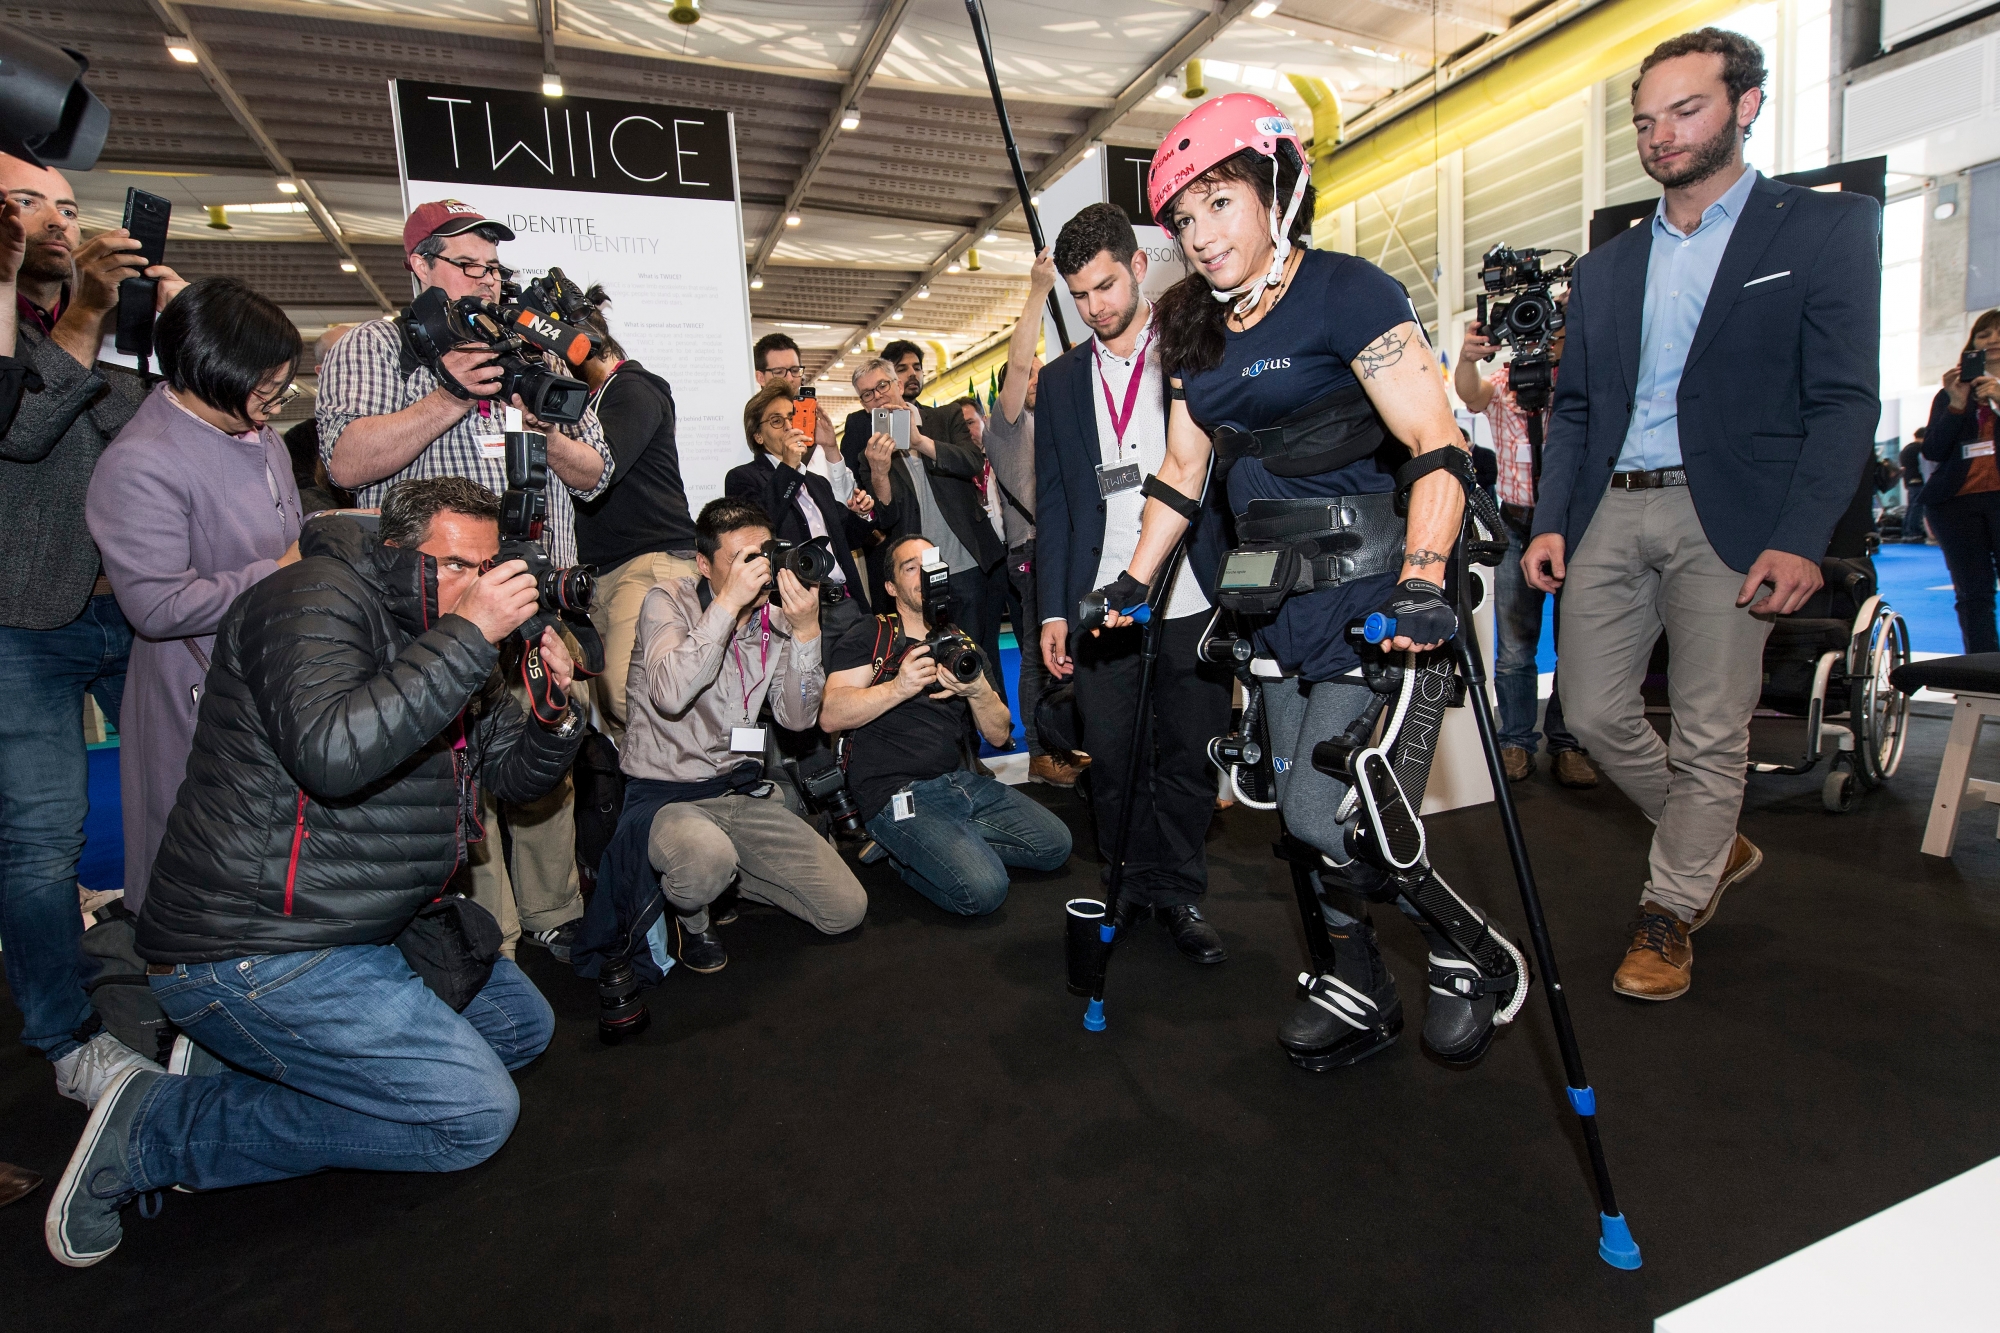 Silke Pan, a Handbike paraplegics athlete presents an invention called "Twiice", at the 45th International Exhibition of Inventions, in Geneva, Switzerland, Wednesday, March 29, 2017. Twiice is a lower limb exoskeleton that enables paraplegic people to stand up, walk again and even climb stairs. The development of a modular exoskeleton for walking assistance began in February 2015 at EPFL (Ecole polytechnique federale de Lausanne). (KEYSTONE/Jean-Christophe Bott) SWITZERLAND EXHIBITION OF INVENTIONS